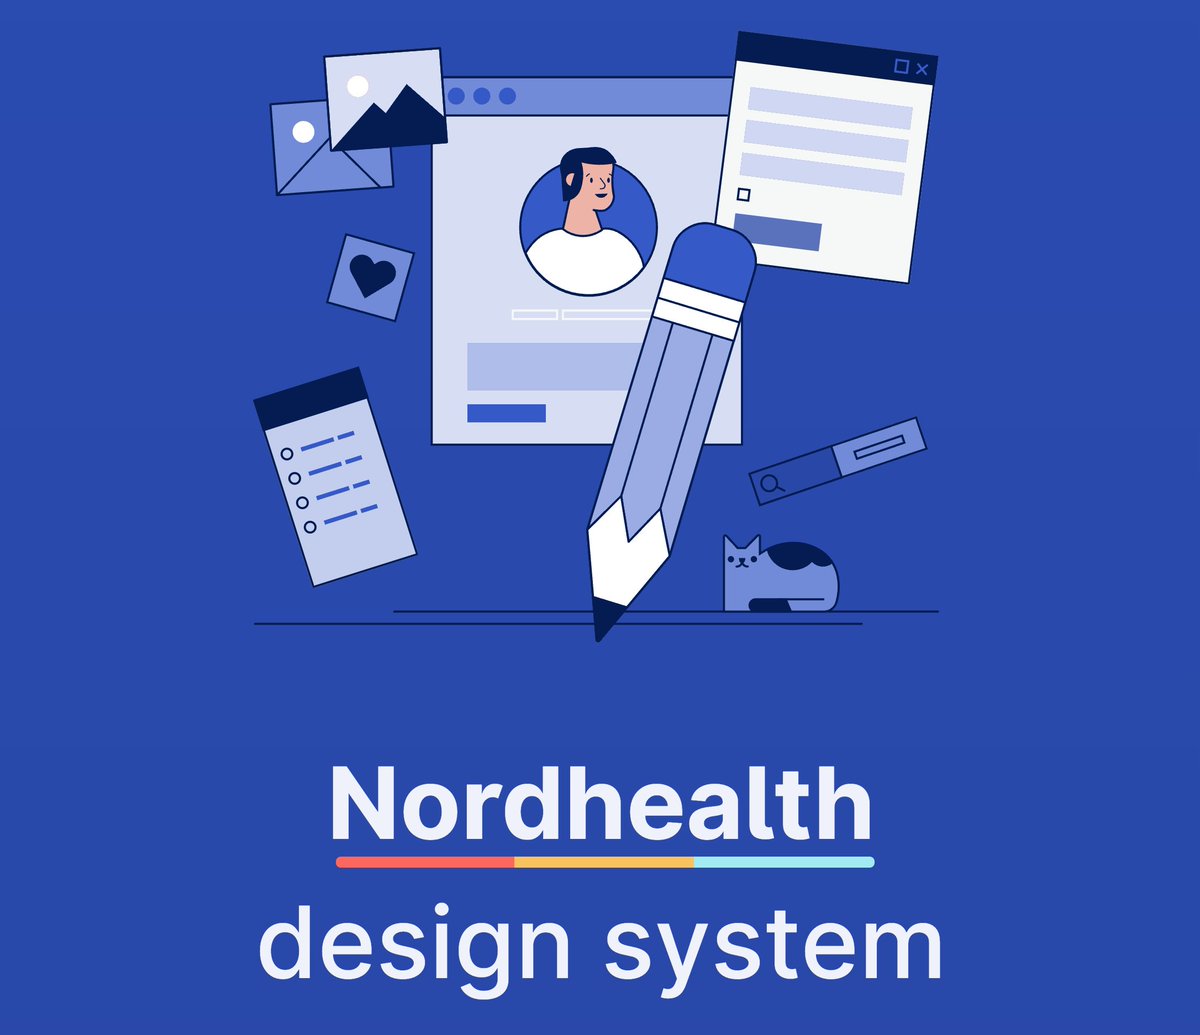 How do you organize your design system? What about naming and structure? Here are some obscure but exceptional design systems that I keep coming back to often:

linkedin.com/feed/update/ur…

Nordhealth DS
Goldman Sachs DS
Workday DS
Neurodiversity DS
Workbench DS

#ux #designsystems